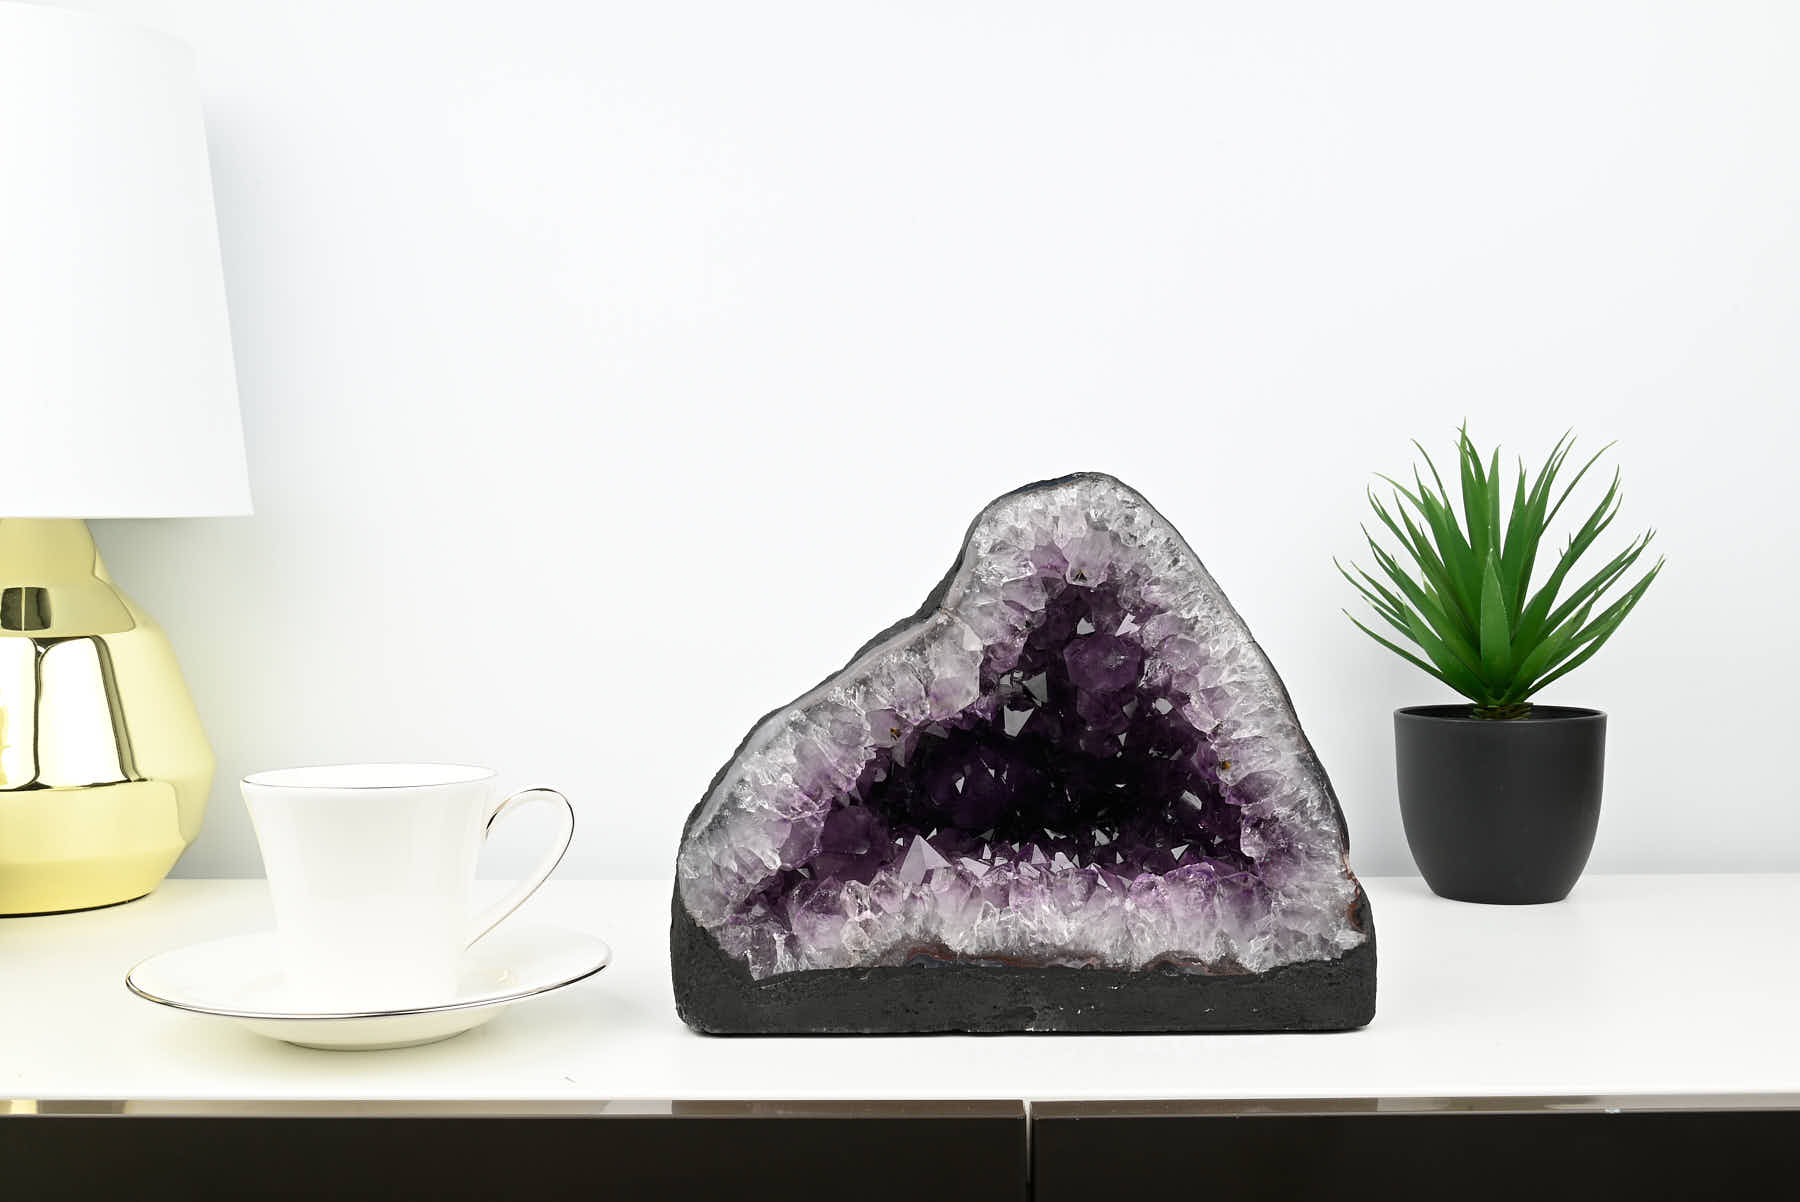 Extra Quality Amethyst Cathedral - 5.48kg, 19cm tall - #CAAMET-10026